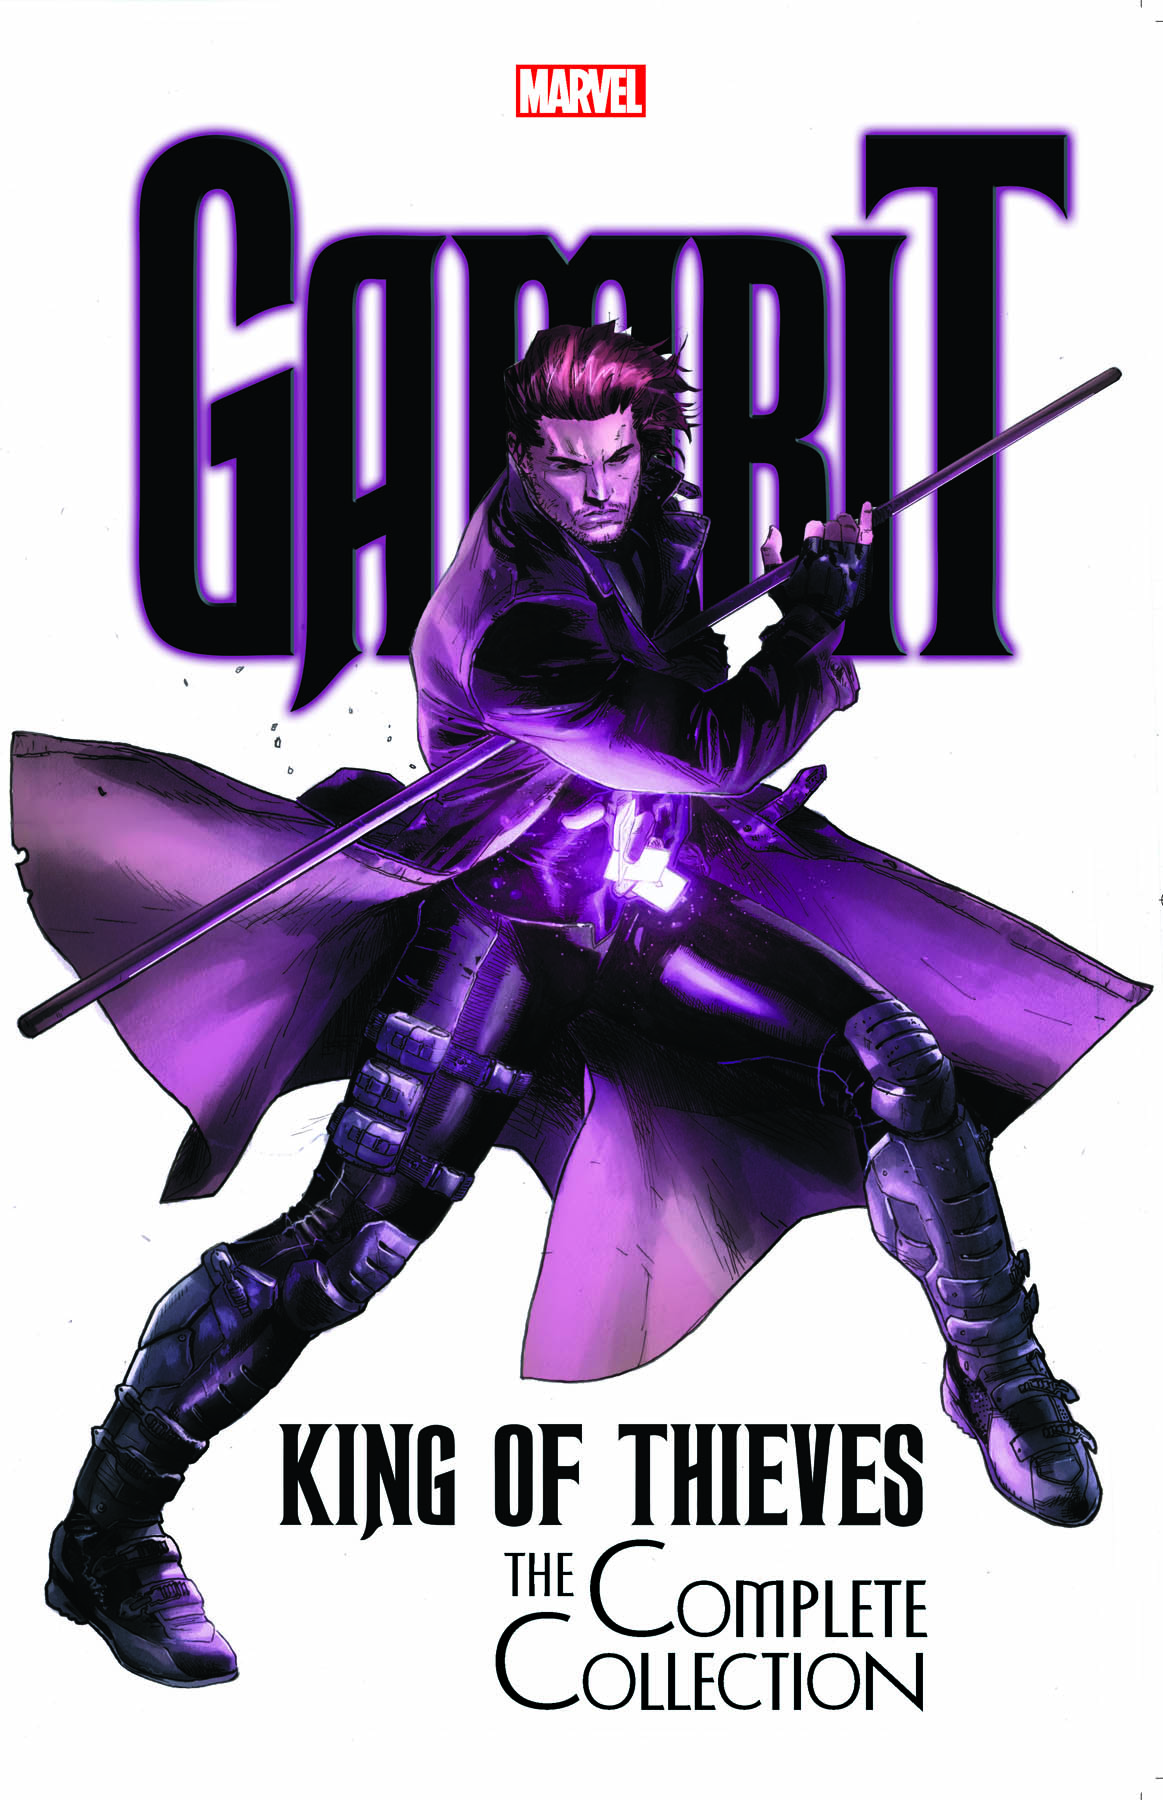 Gambit: King of Thieves - The Complete Collection (Trade Paperback)